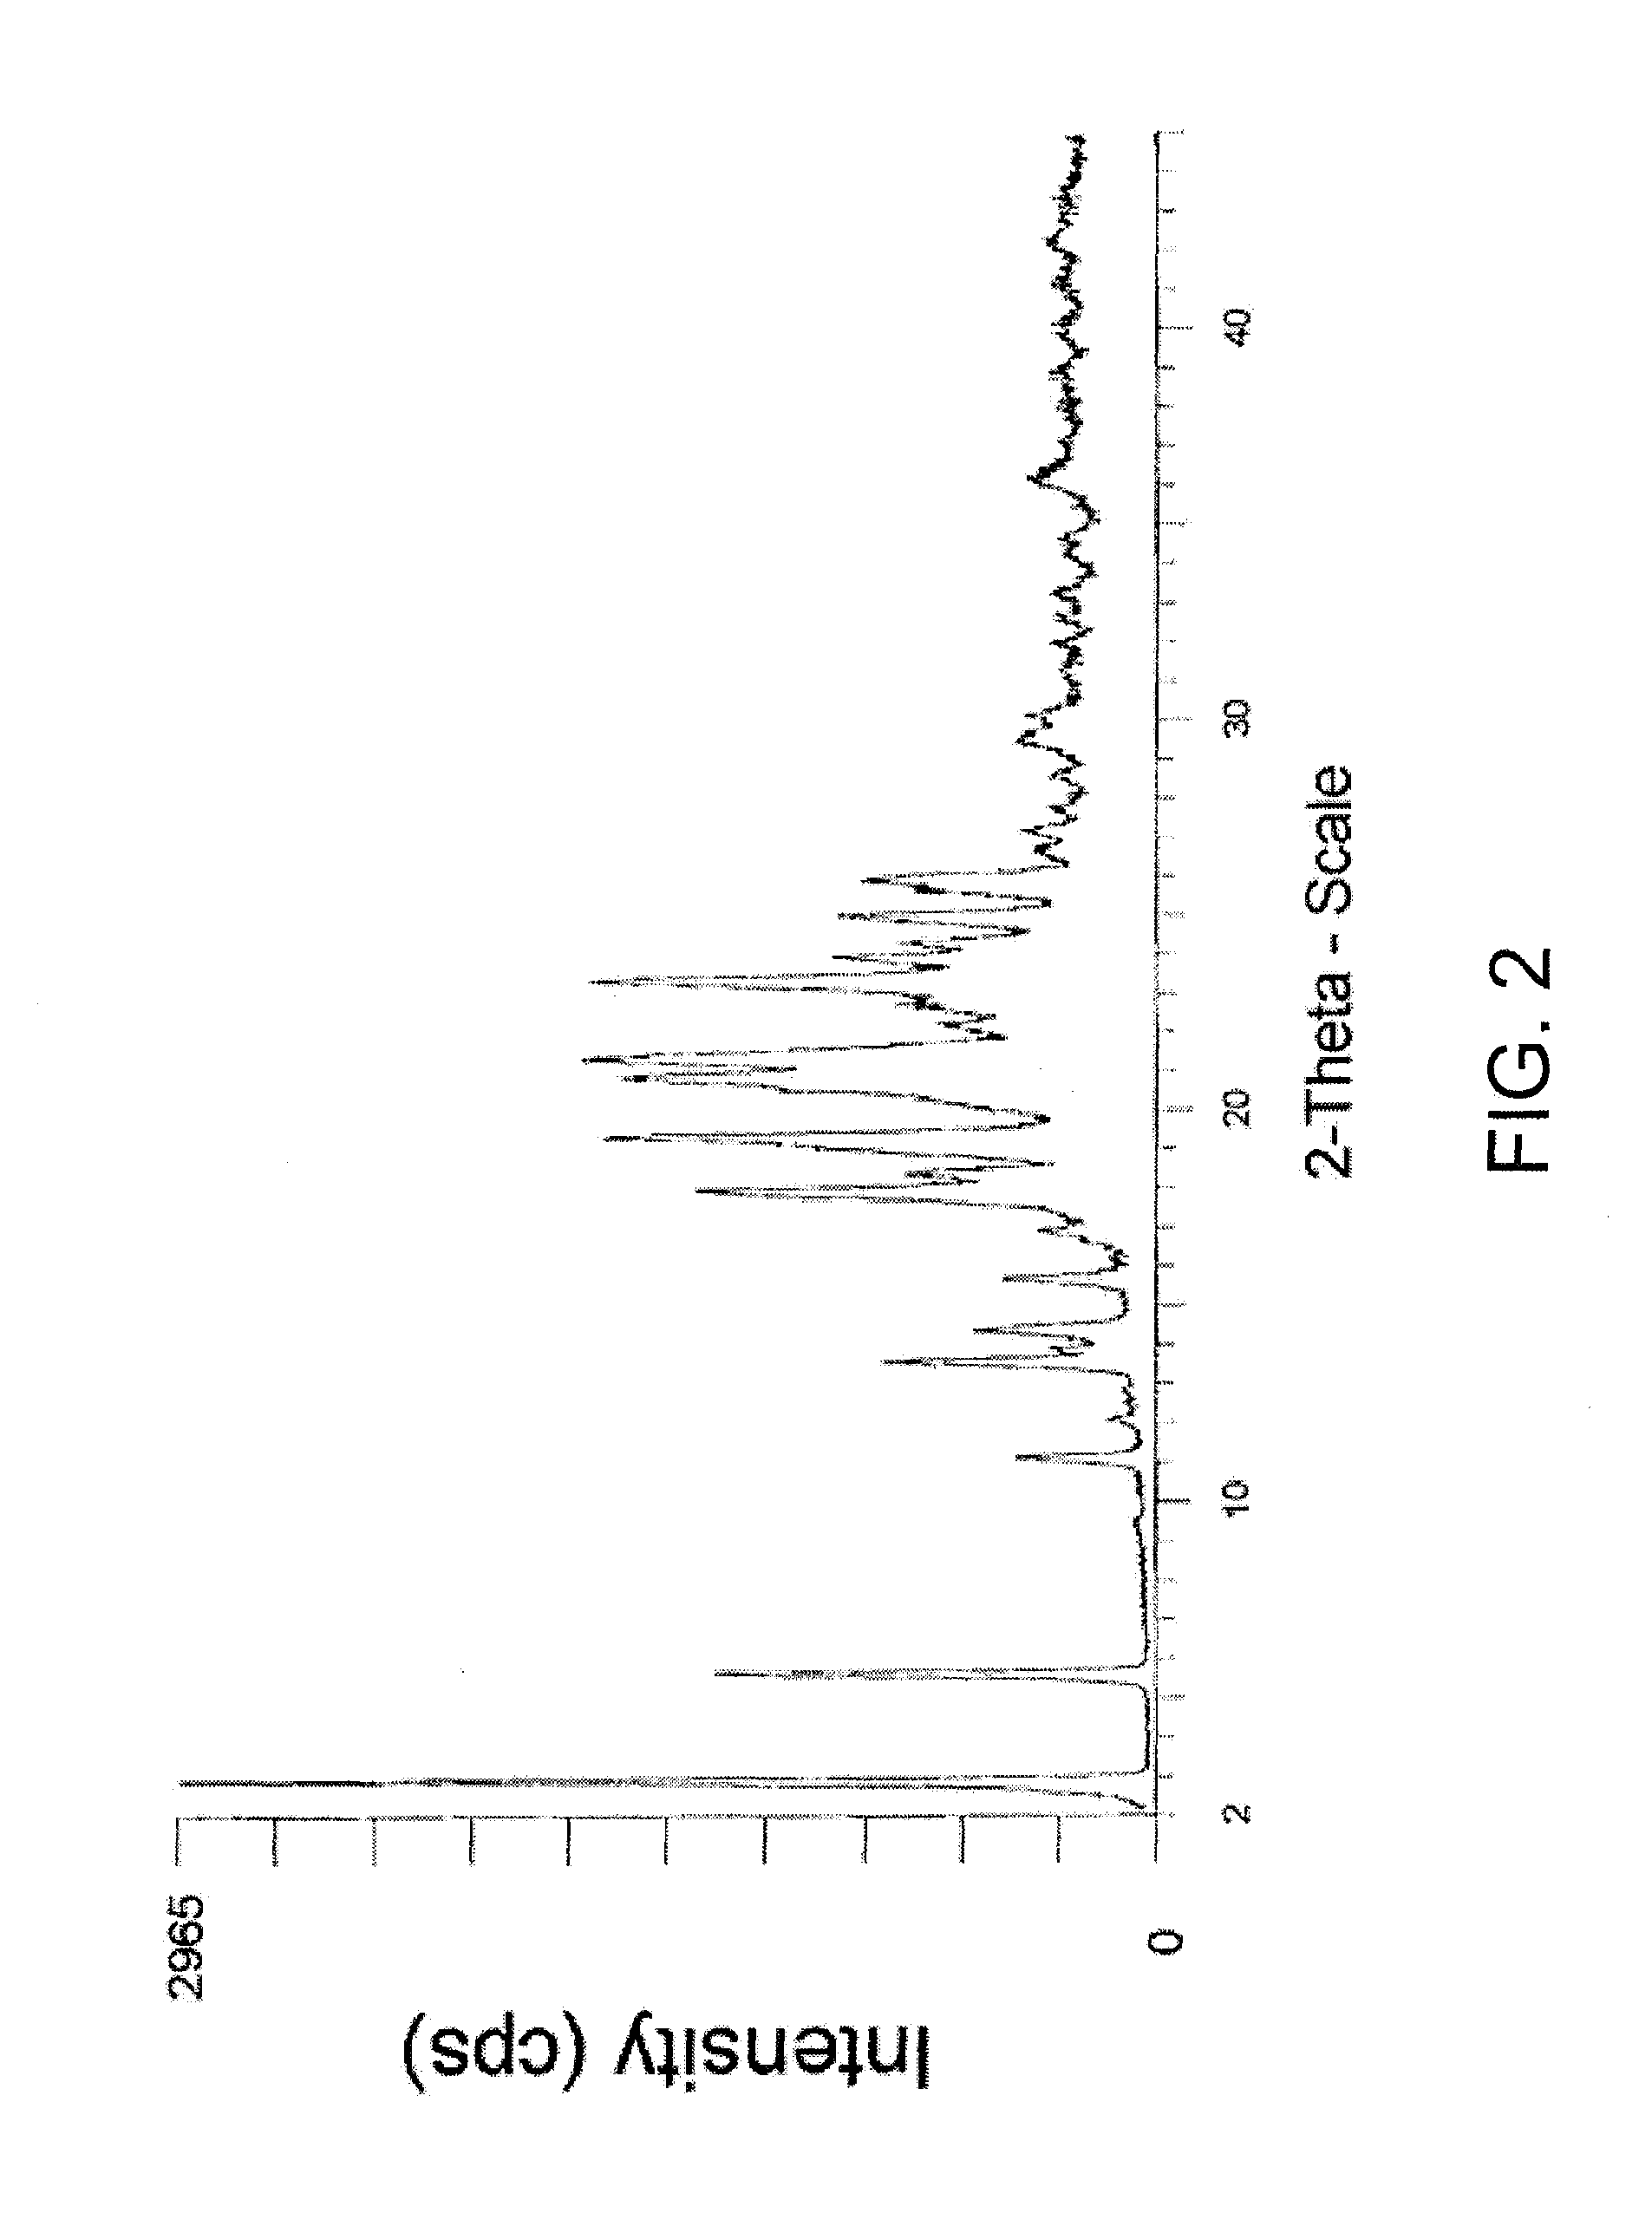 Phosphonate ester derivatives and methods of synthesis thereof